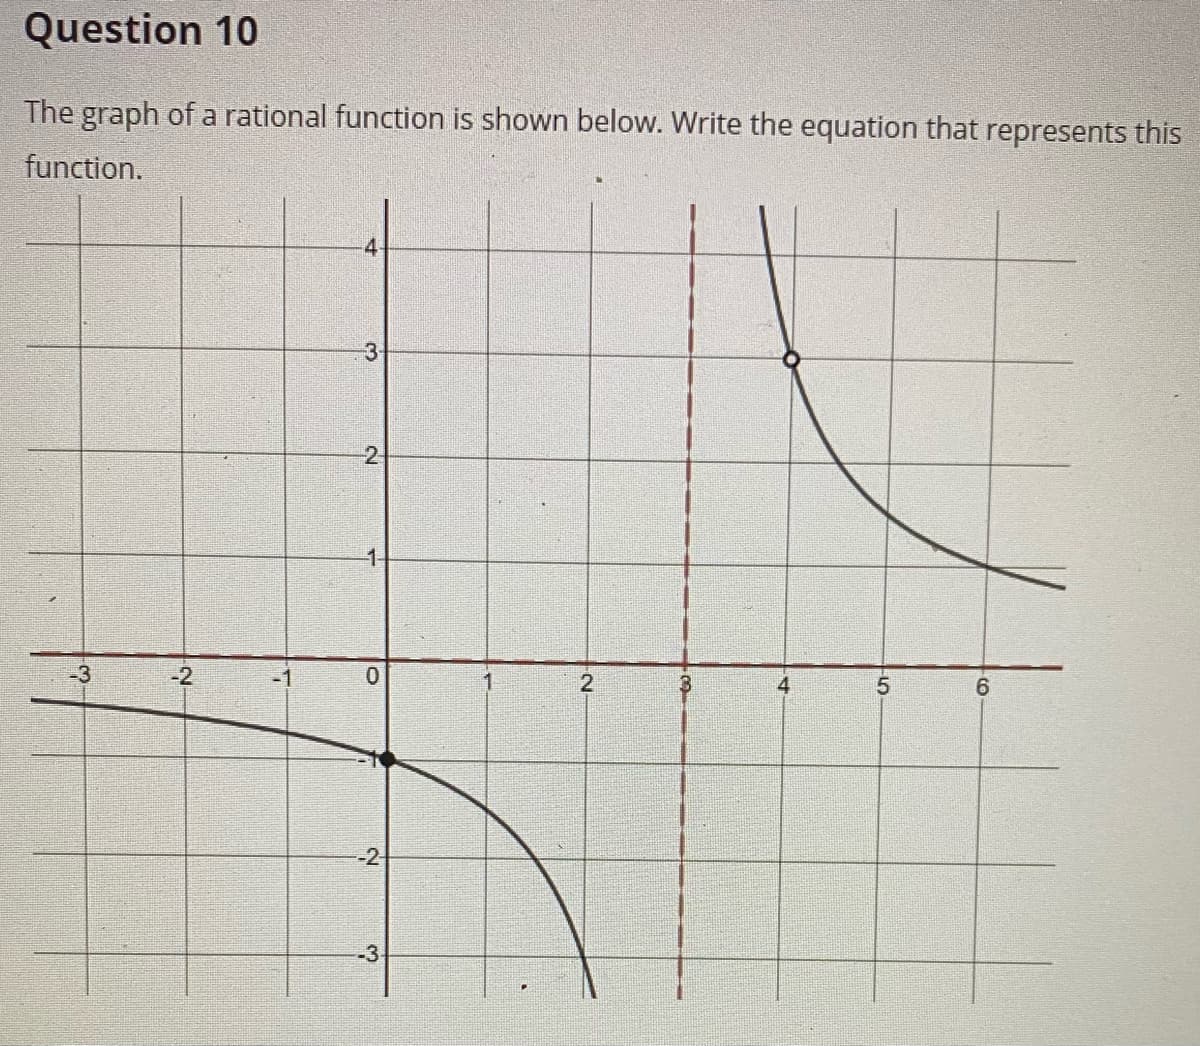 Question 10
The graph of a rational function is shown below. Write the equation that represents this
function.
4
-2-
-3
-2
2
6.
-2
-3-
